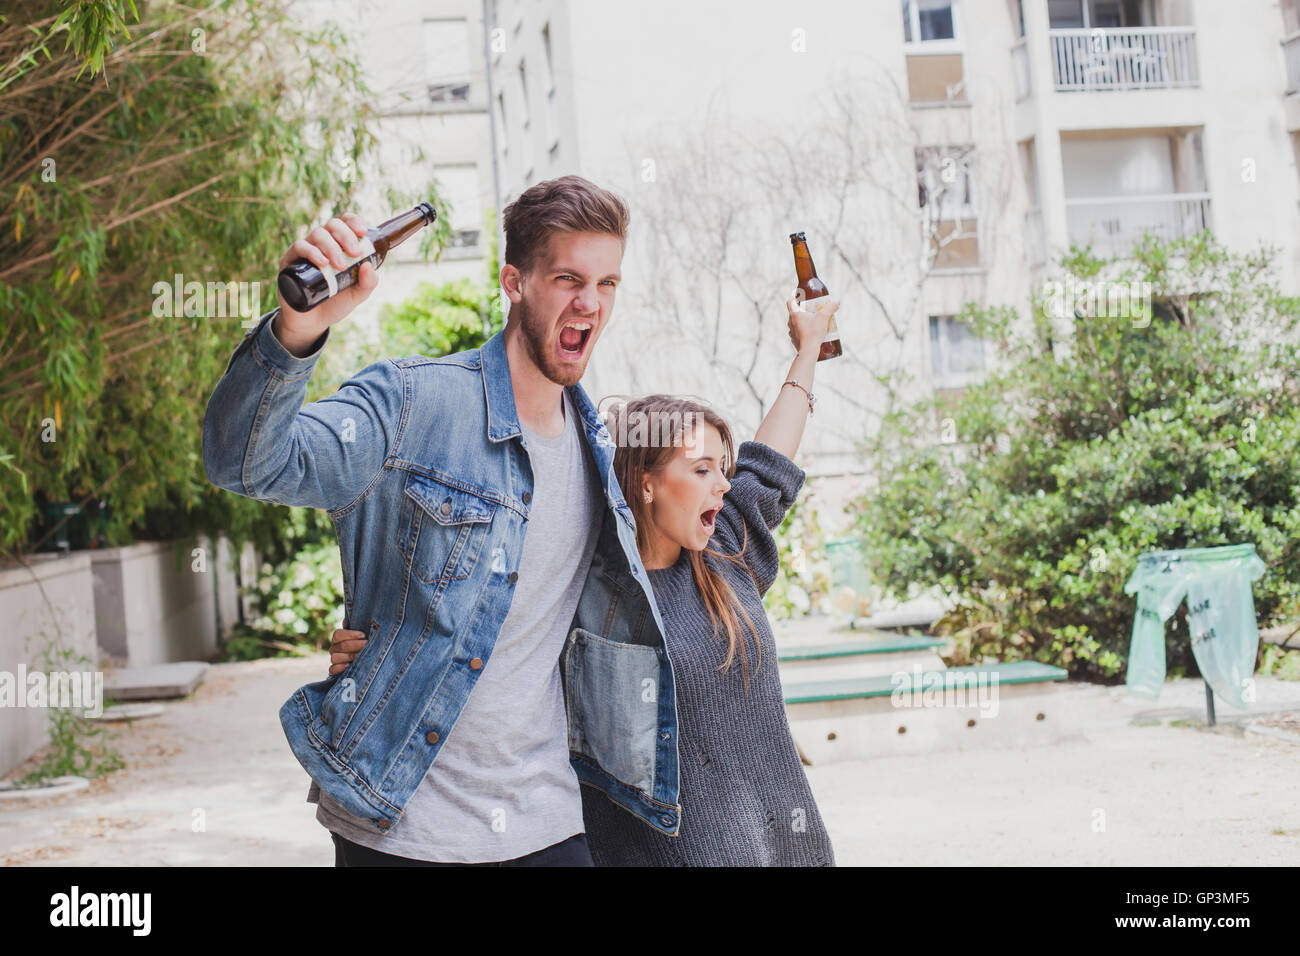 drunk people singing on the street, young couple with beers Stock Photo